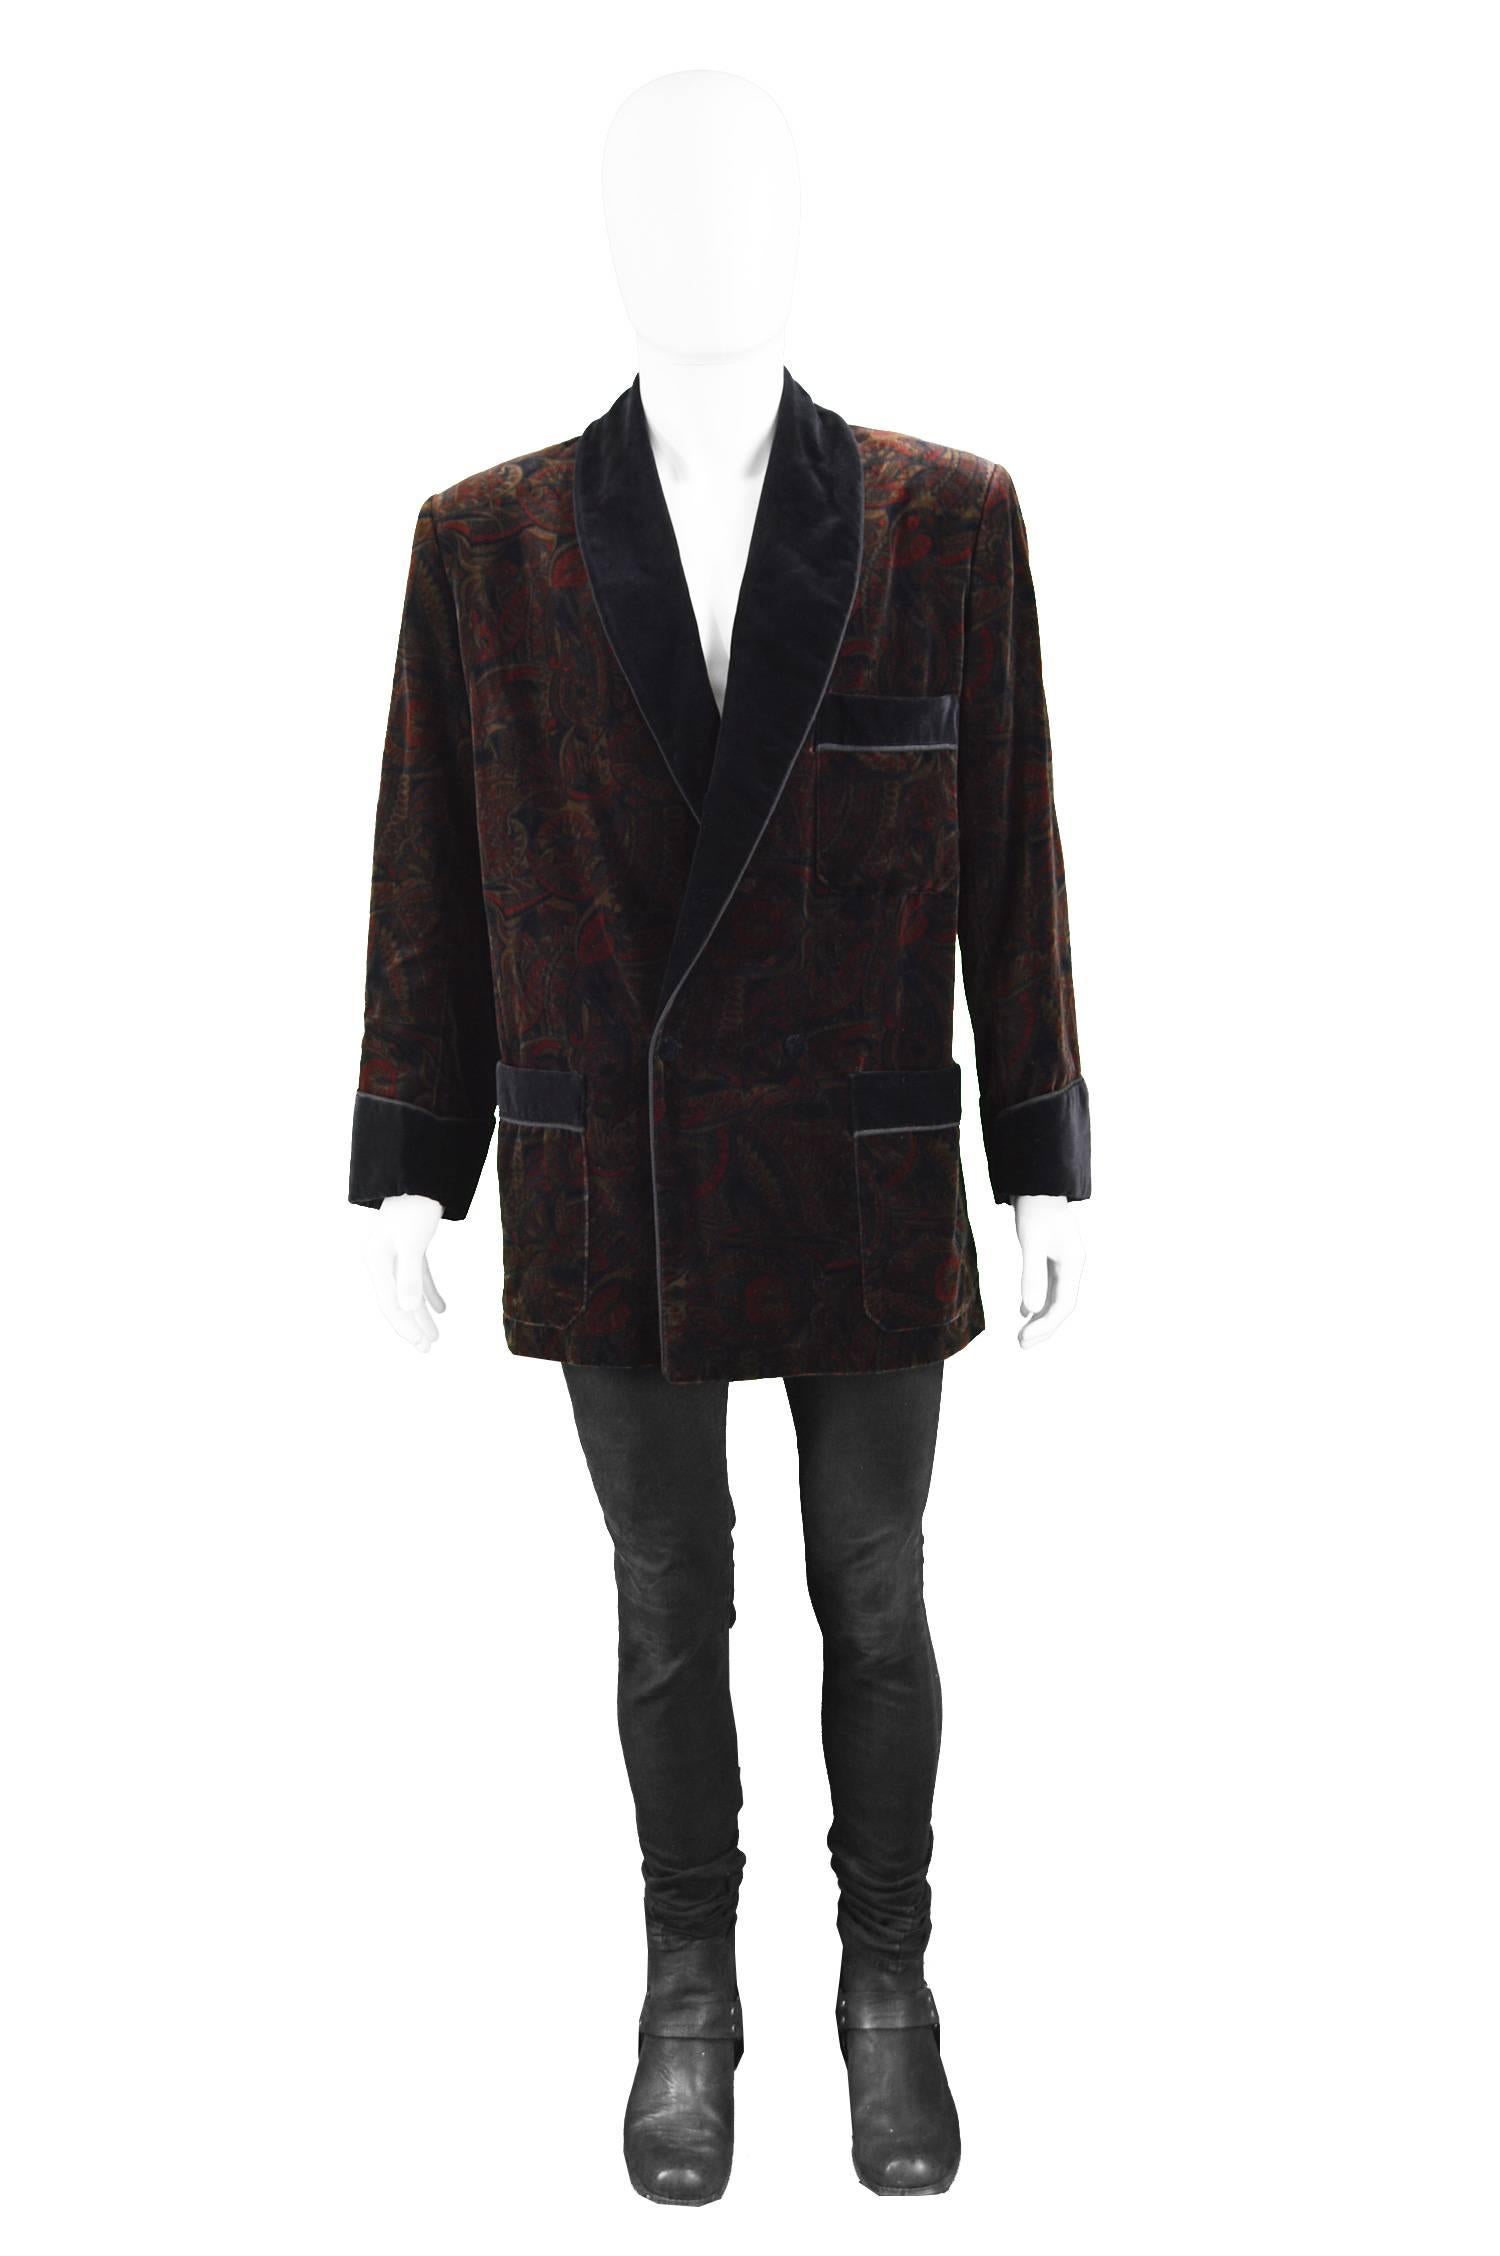 Vintage Men's Paisley Print Velvet Smoking Jacket with Braided Lapels, 1980s

Size: Marked 50 which is roughly a men's Medium but has a loose, relaxed fit, as pictured, like most smoking jackets. 
Chest - up to 46” / 117cm (has a looser fit)
Waist -